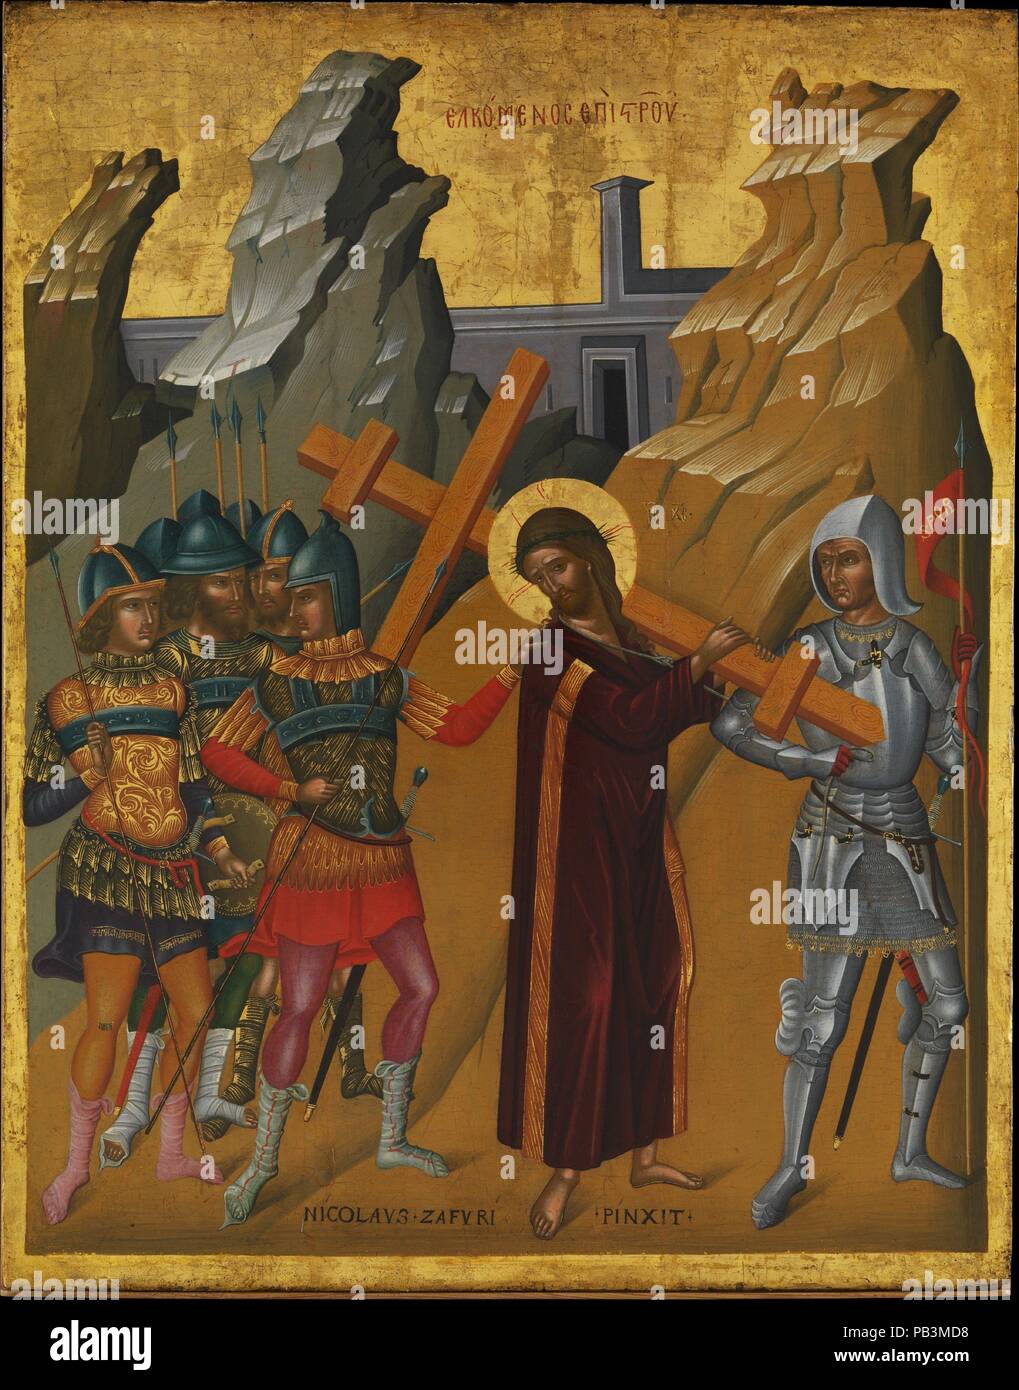 Christ Bearing the Cross. Artist: Nicolaos Tzafouris (Greek, ca.  1455-1500/1501). Dimensions: 27 1/4 x 21 1/2 in. (69.2 x 54.6 cm).  Nicholaos Tzafouris was one of the many icon painters working in